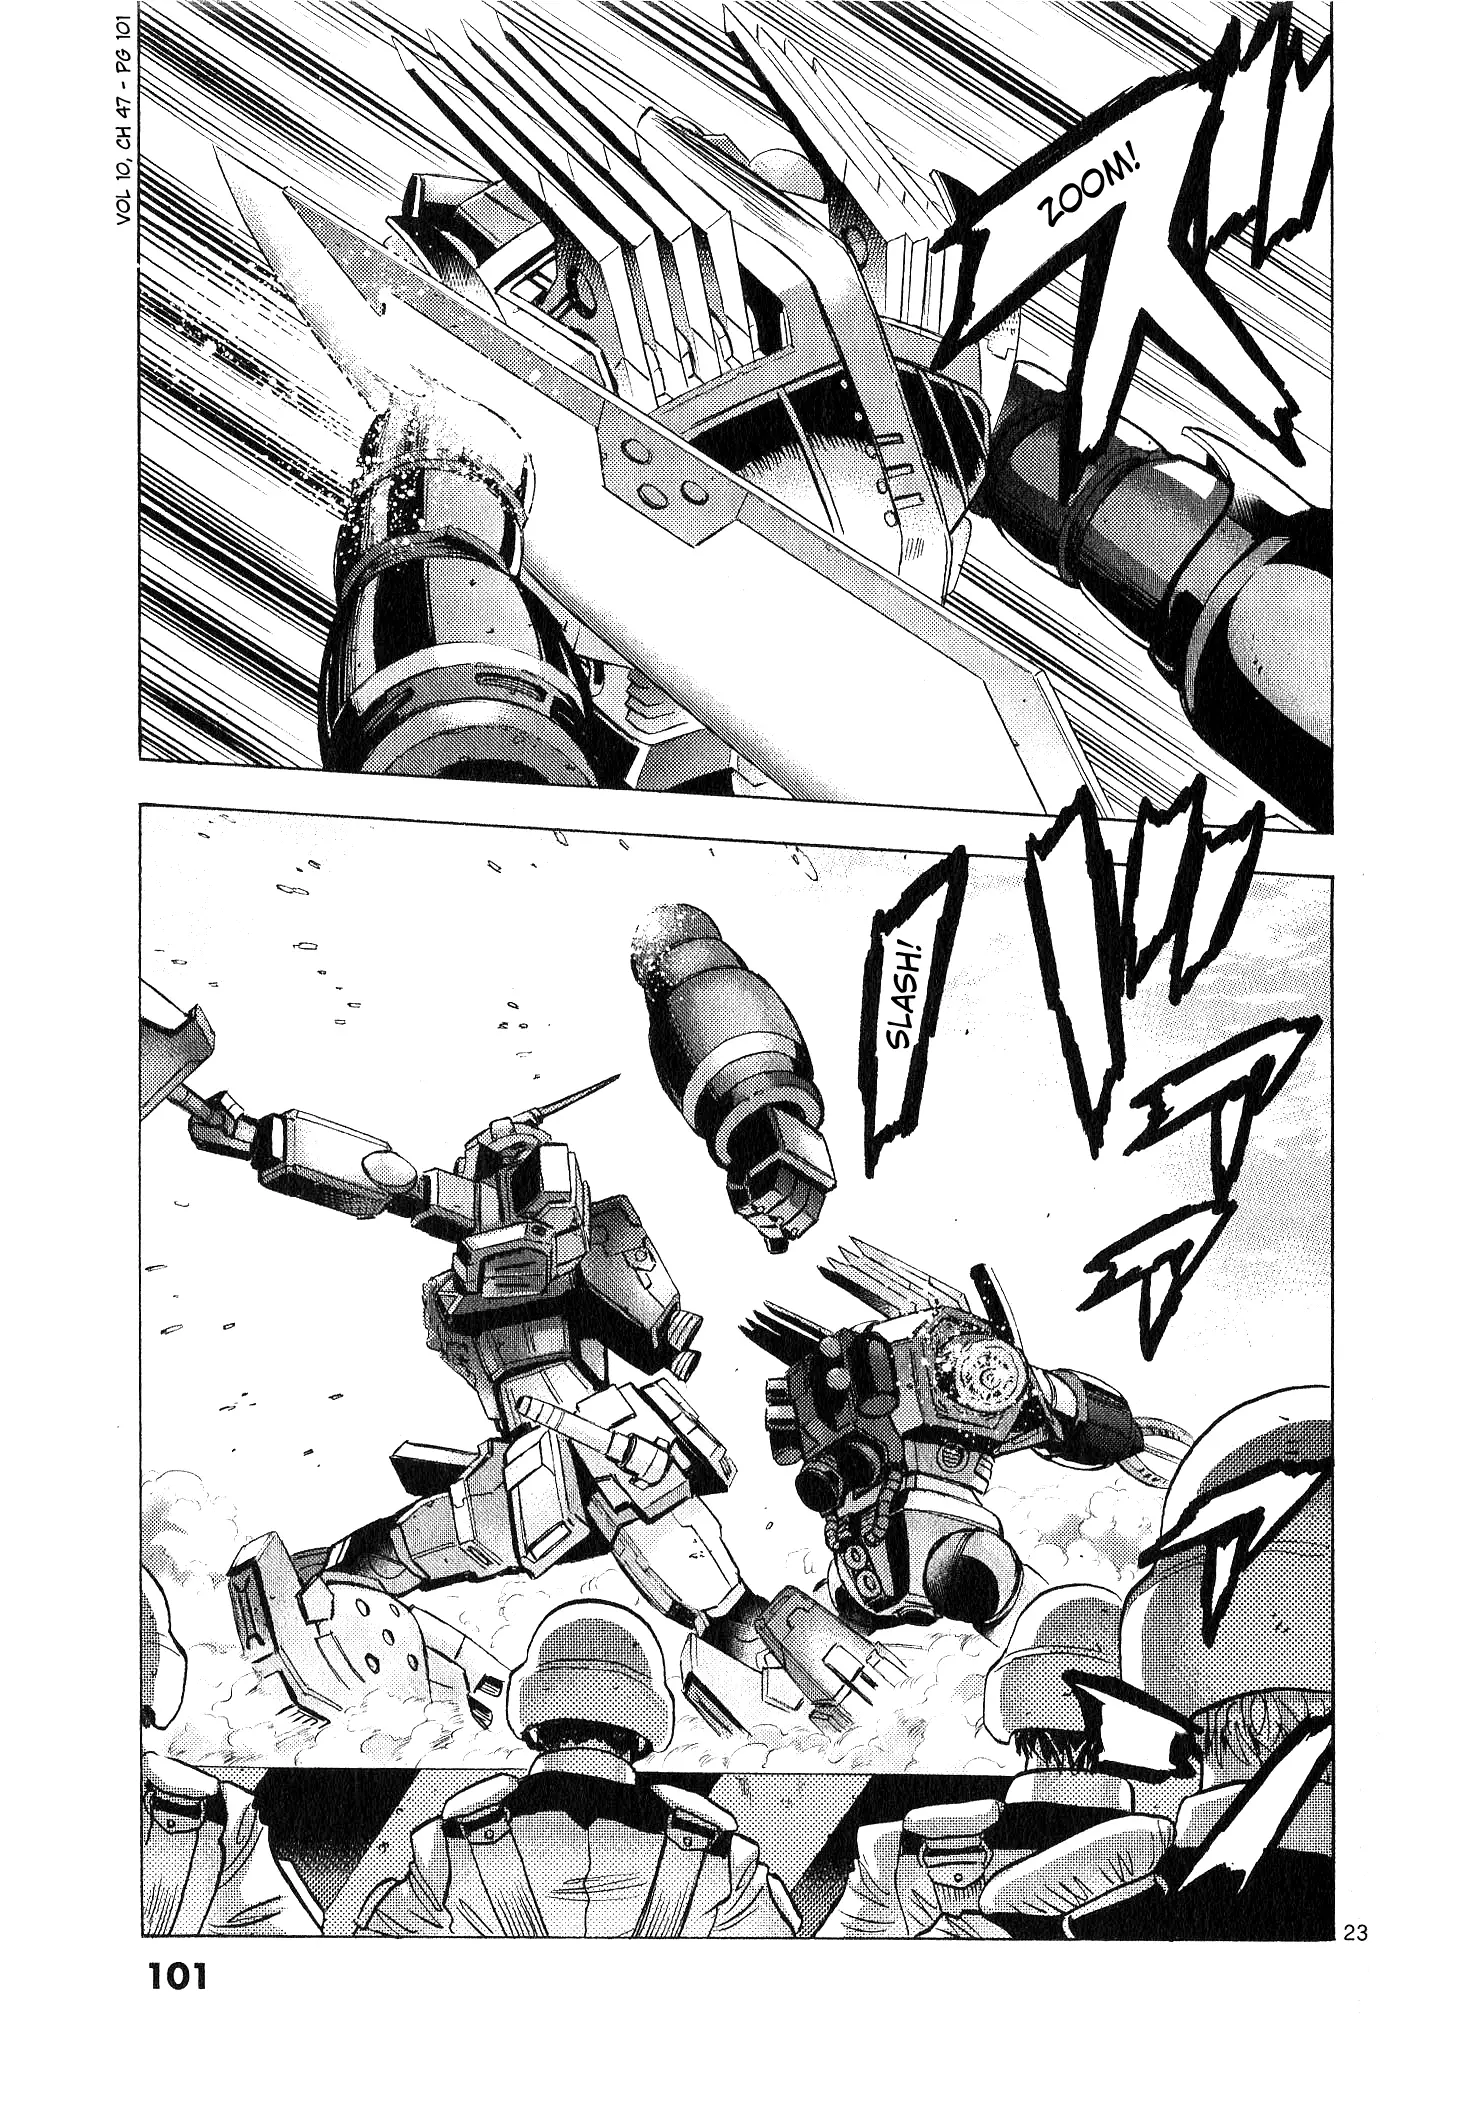 Mobile Suit Gundam Aggressor - 47 page 20-1bf93213